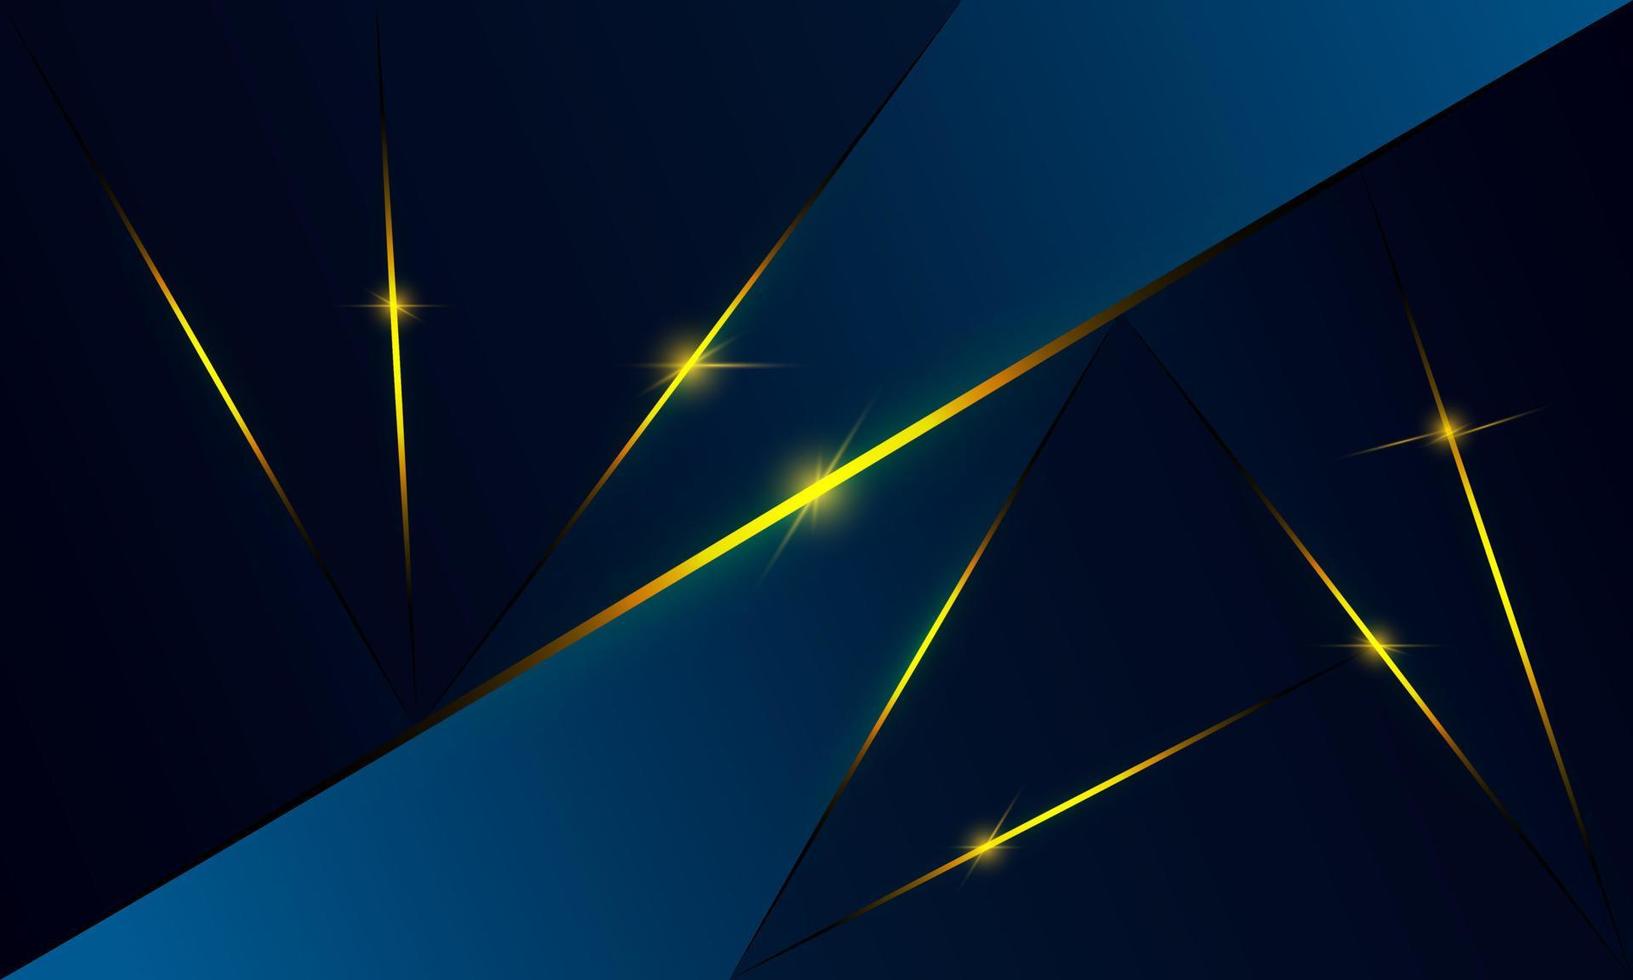 Abstract blue polygon triangles shape pattern background with golden line and lighting effect luxury style. Illustration Vector design digital technology concept.